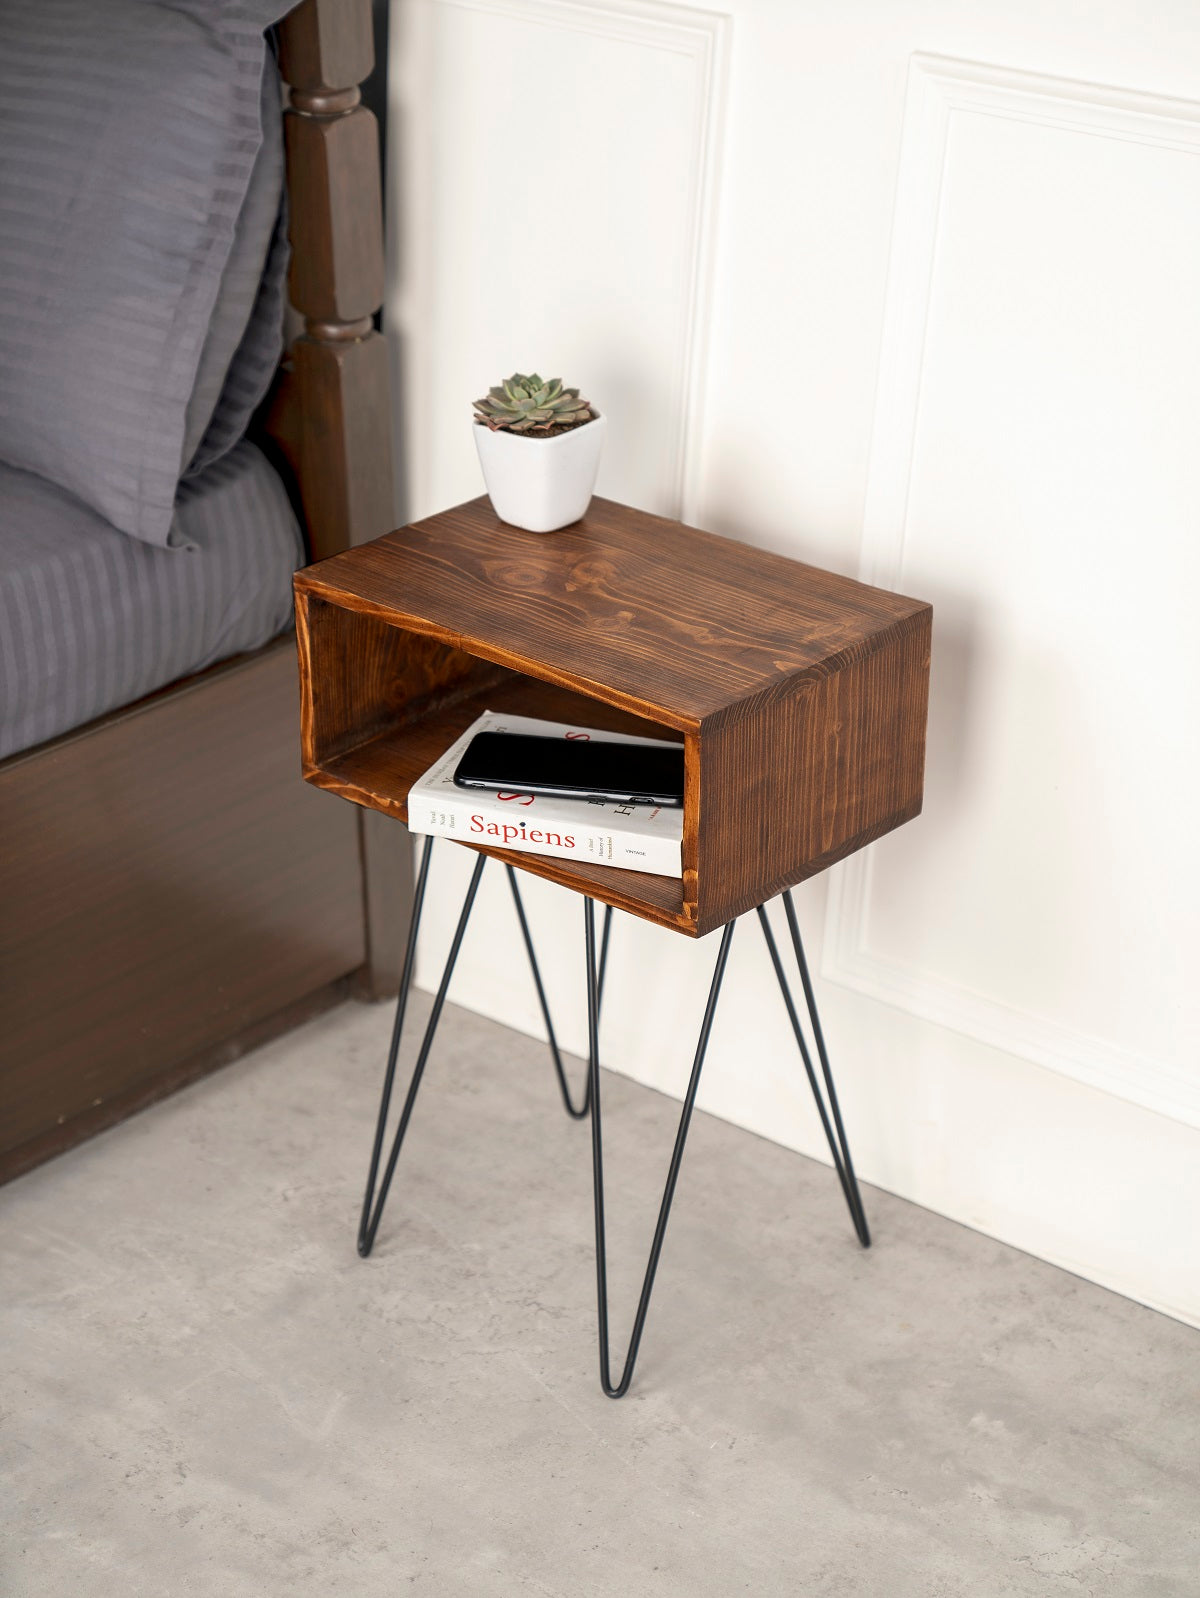 Teak Tint Amalgam Side Tables, Wooden Tables, Bedside Tables, End Tables, Living Room Decor by A Tiny Mistake